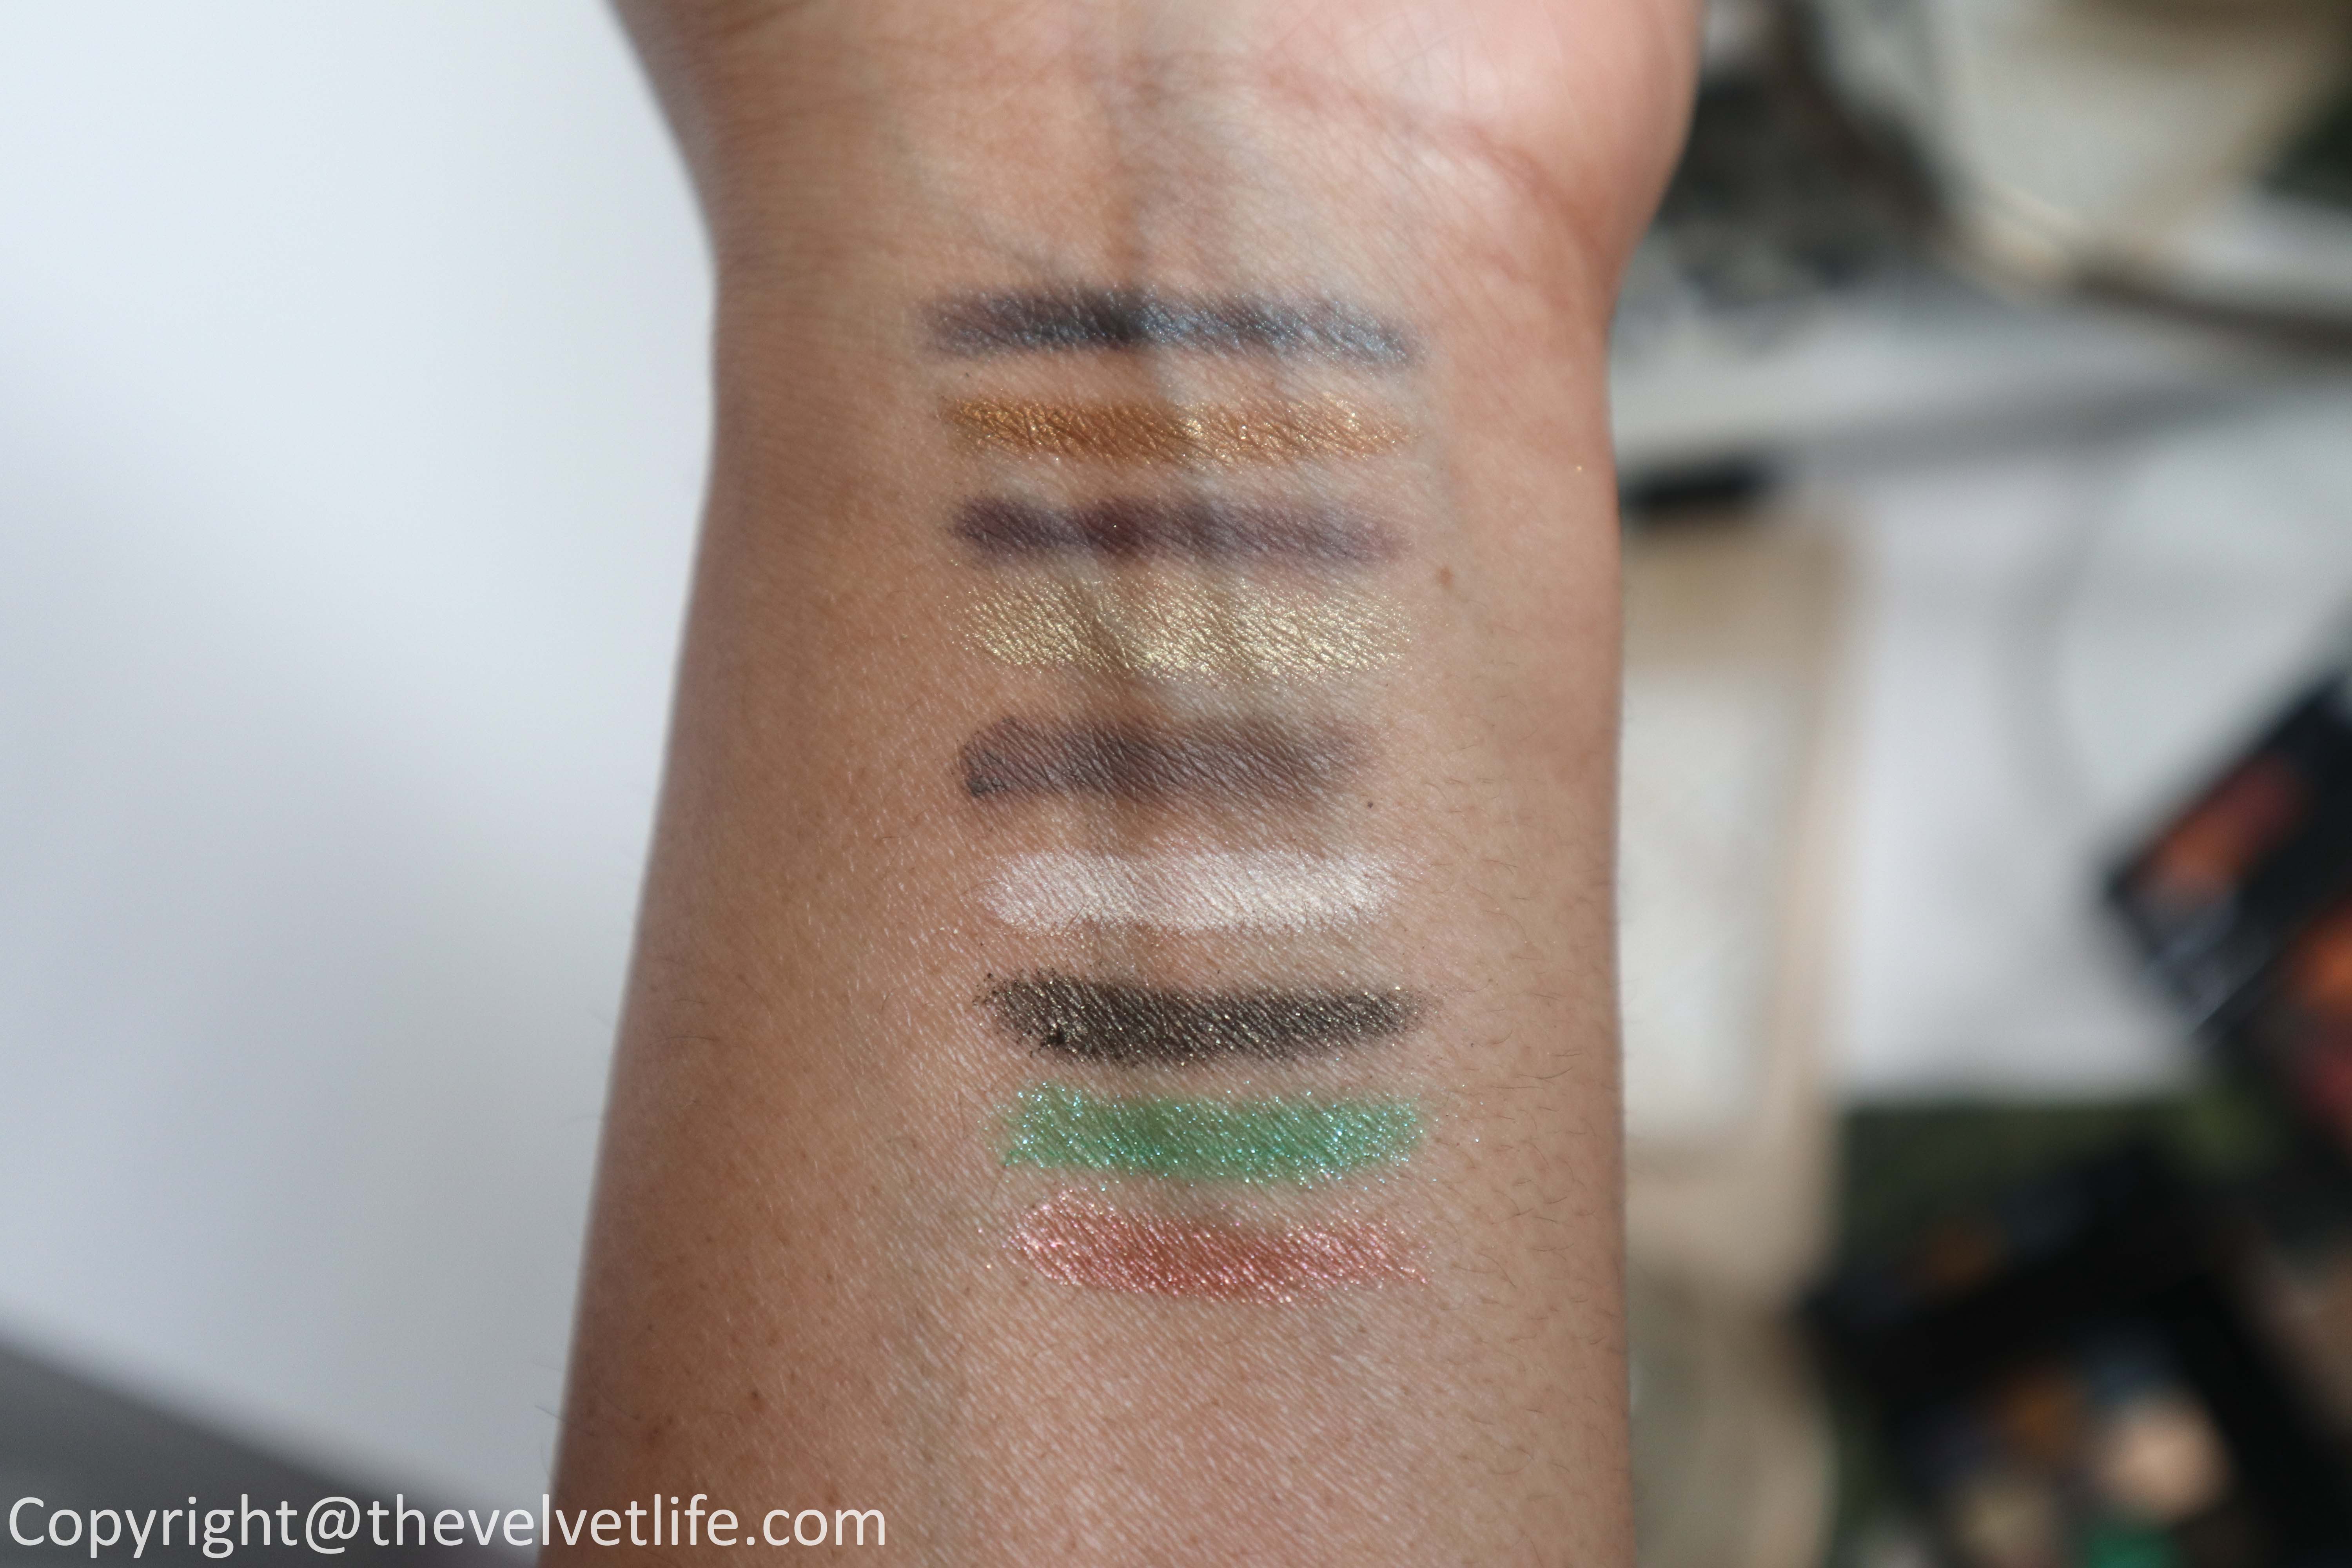 New Givenchy Le 9 De Givenchy Eyeshadow Palette review and swatches of harmony 9.02 and 9.05 